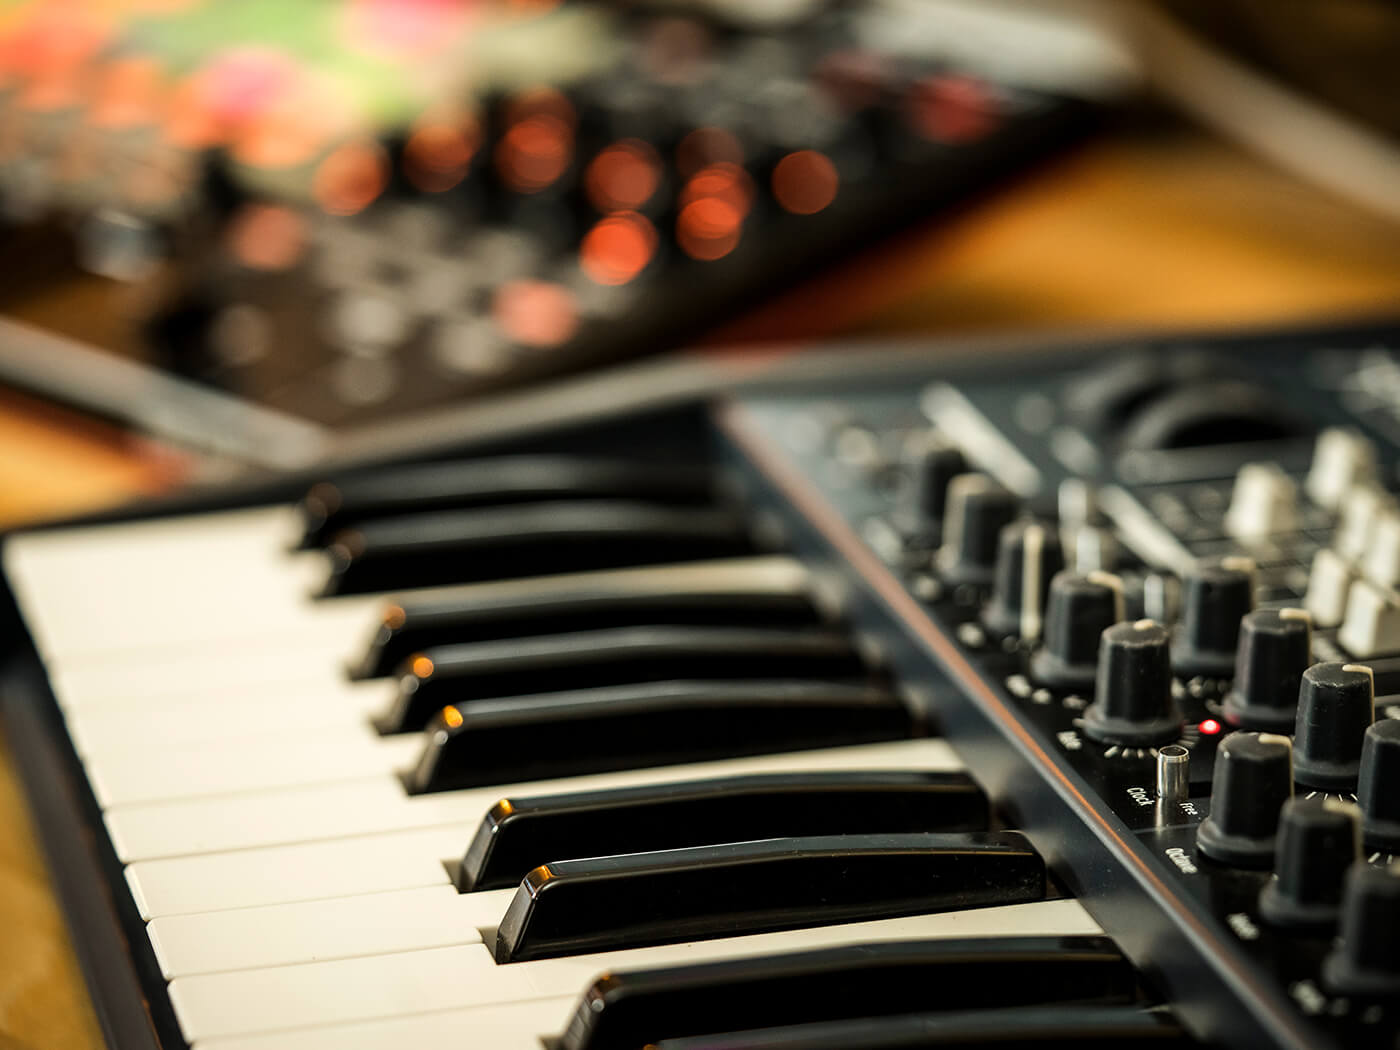 10 tips for better synth pads